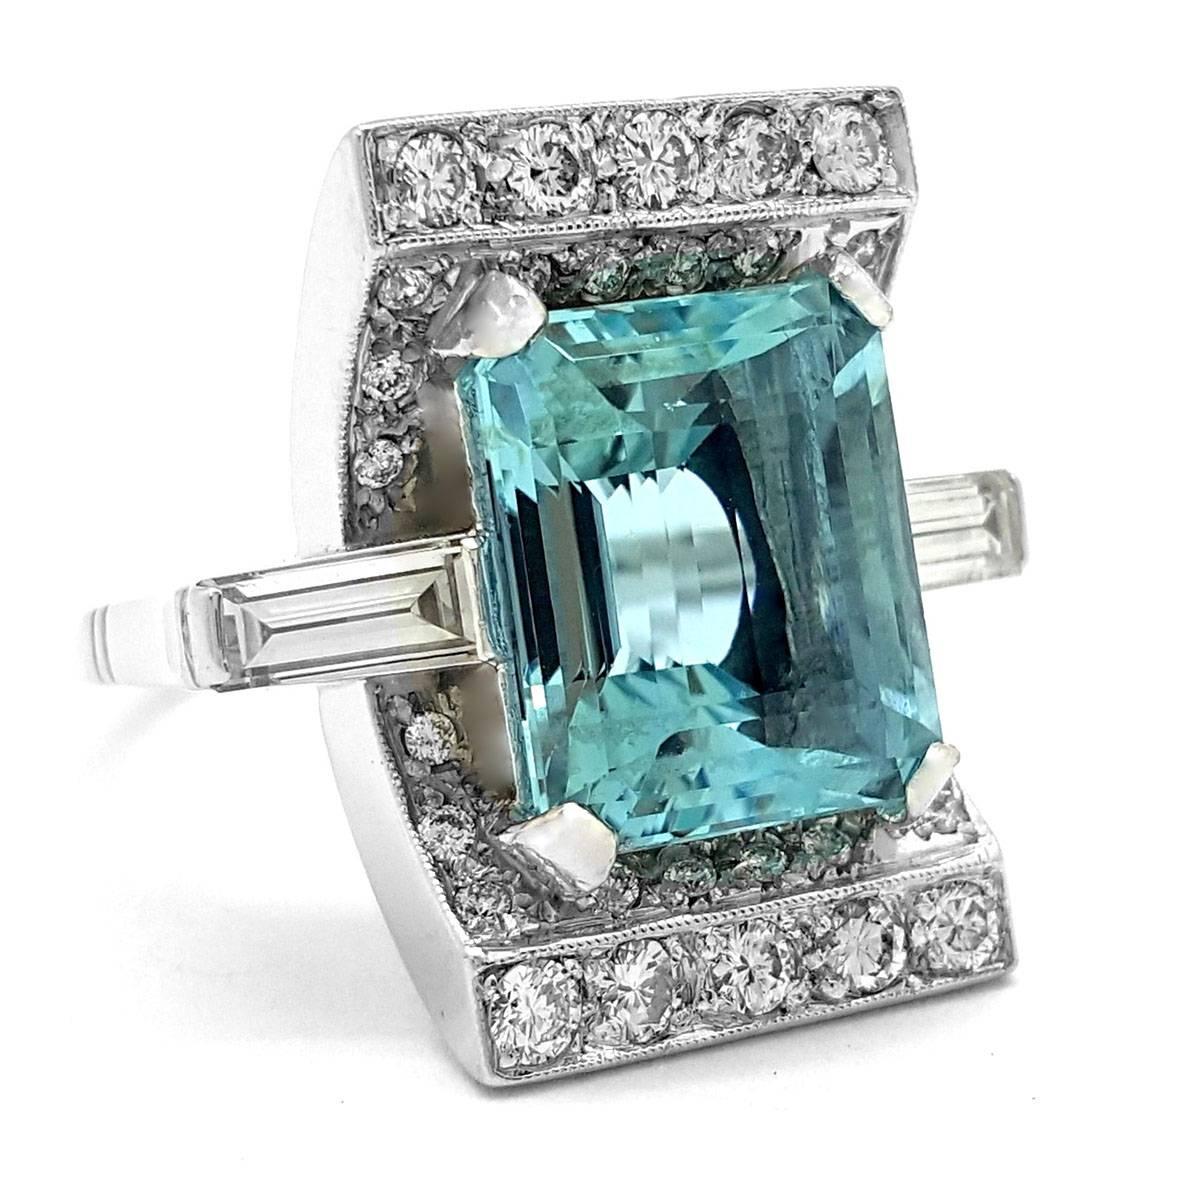 This cocktail ring will blow all others out of the water. Crafted in platinum, this ring holds an emerald-cut aquamarine weighing a whopping 9.54 carats! Its pale blue color is accented by sparkling round diamonds for an additional weight of 1.18